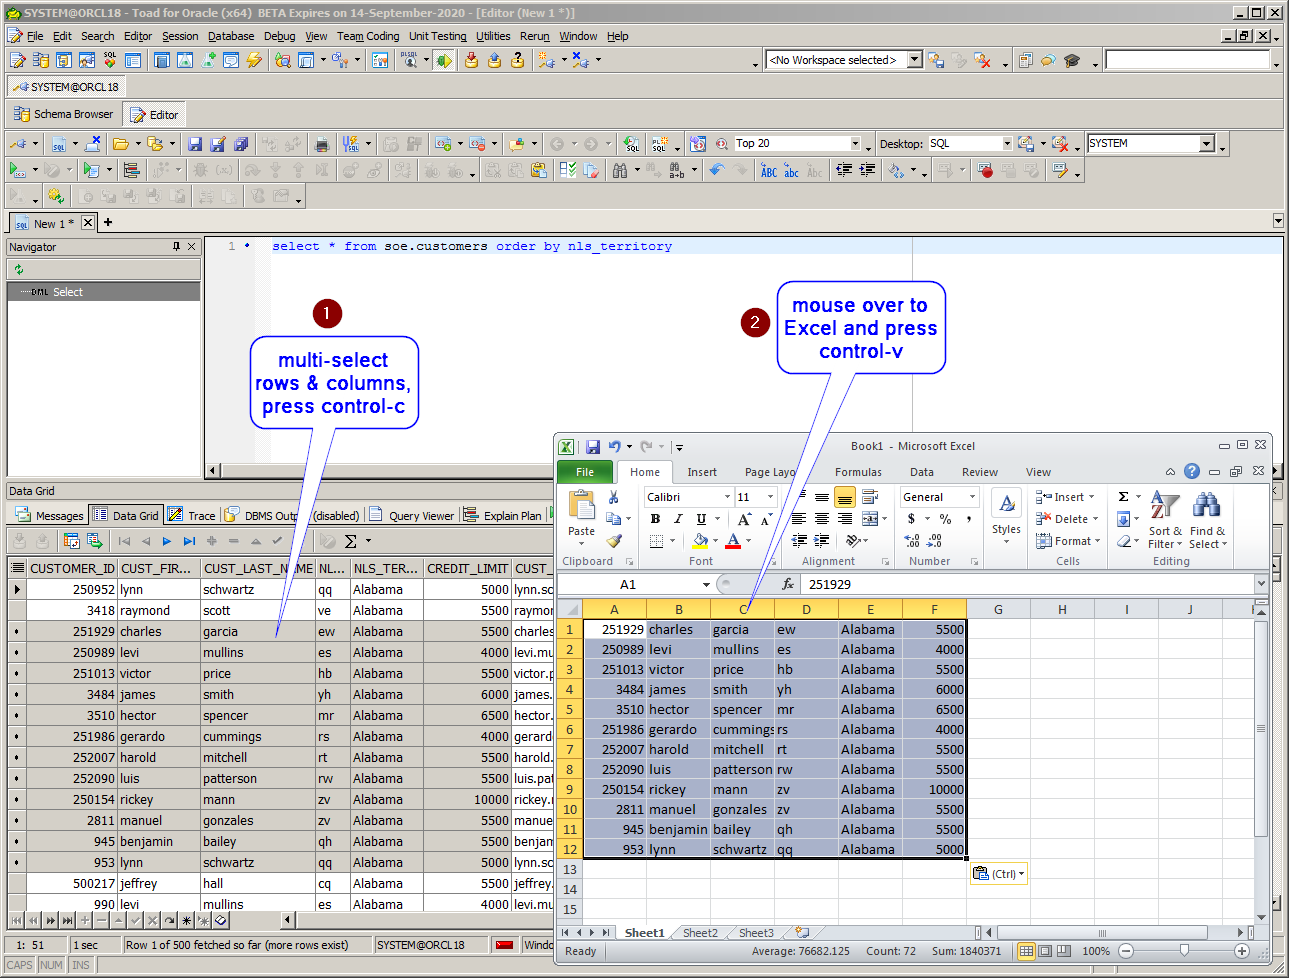 Two ways to export Oracle data from Excel. Open a Toad for Oracle SQL Editor. Execute a query that returns data. If the amount of data is not excessive, multi-select the desired rows and cut and paste the data into Excel.